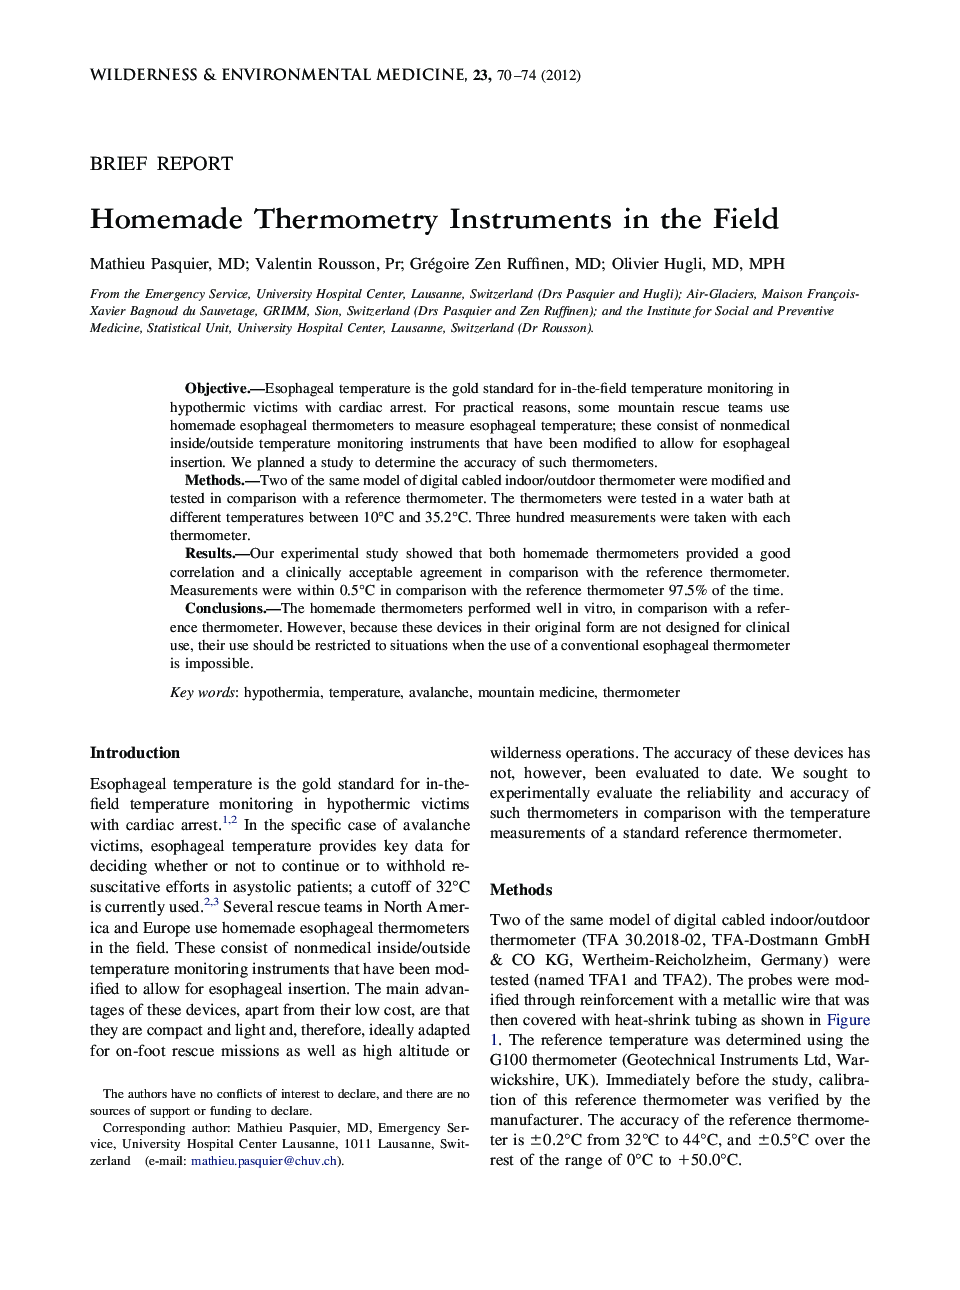 Homemade Thermometry Instruments in the Field